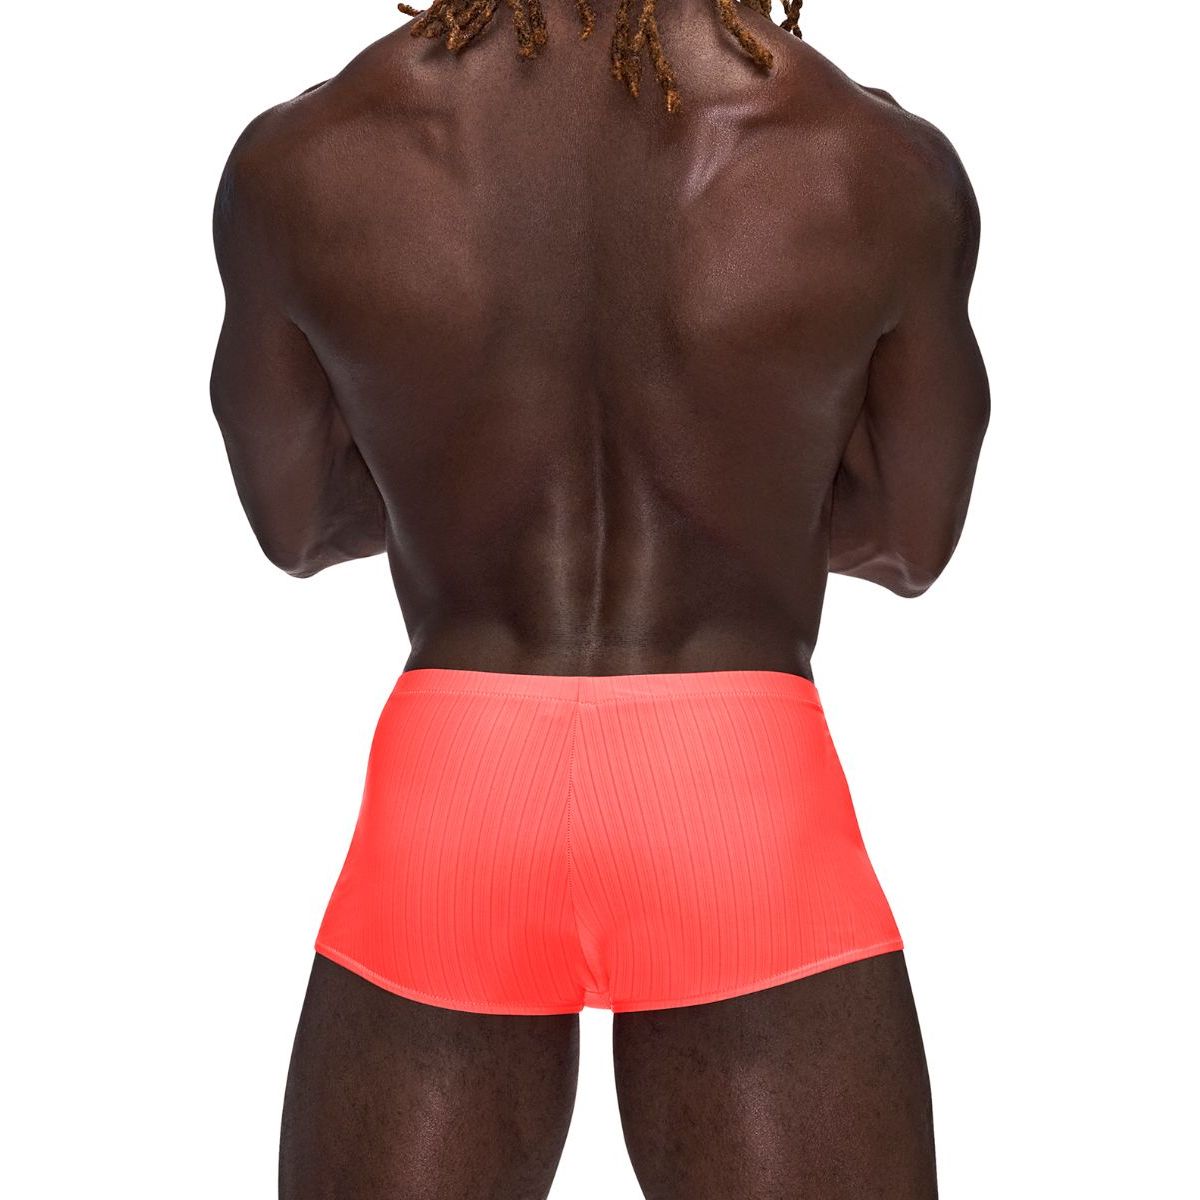 Barely There Shorts for Him by Male Power